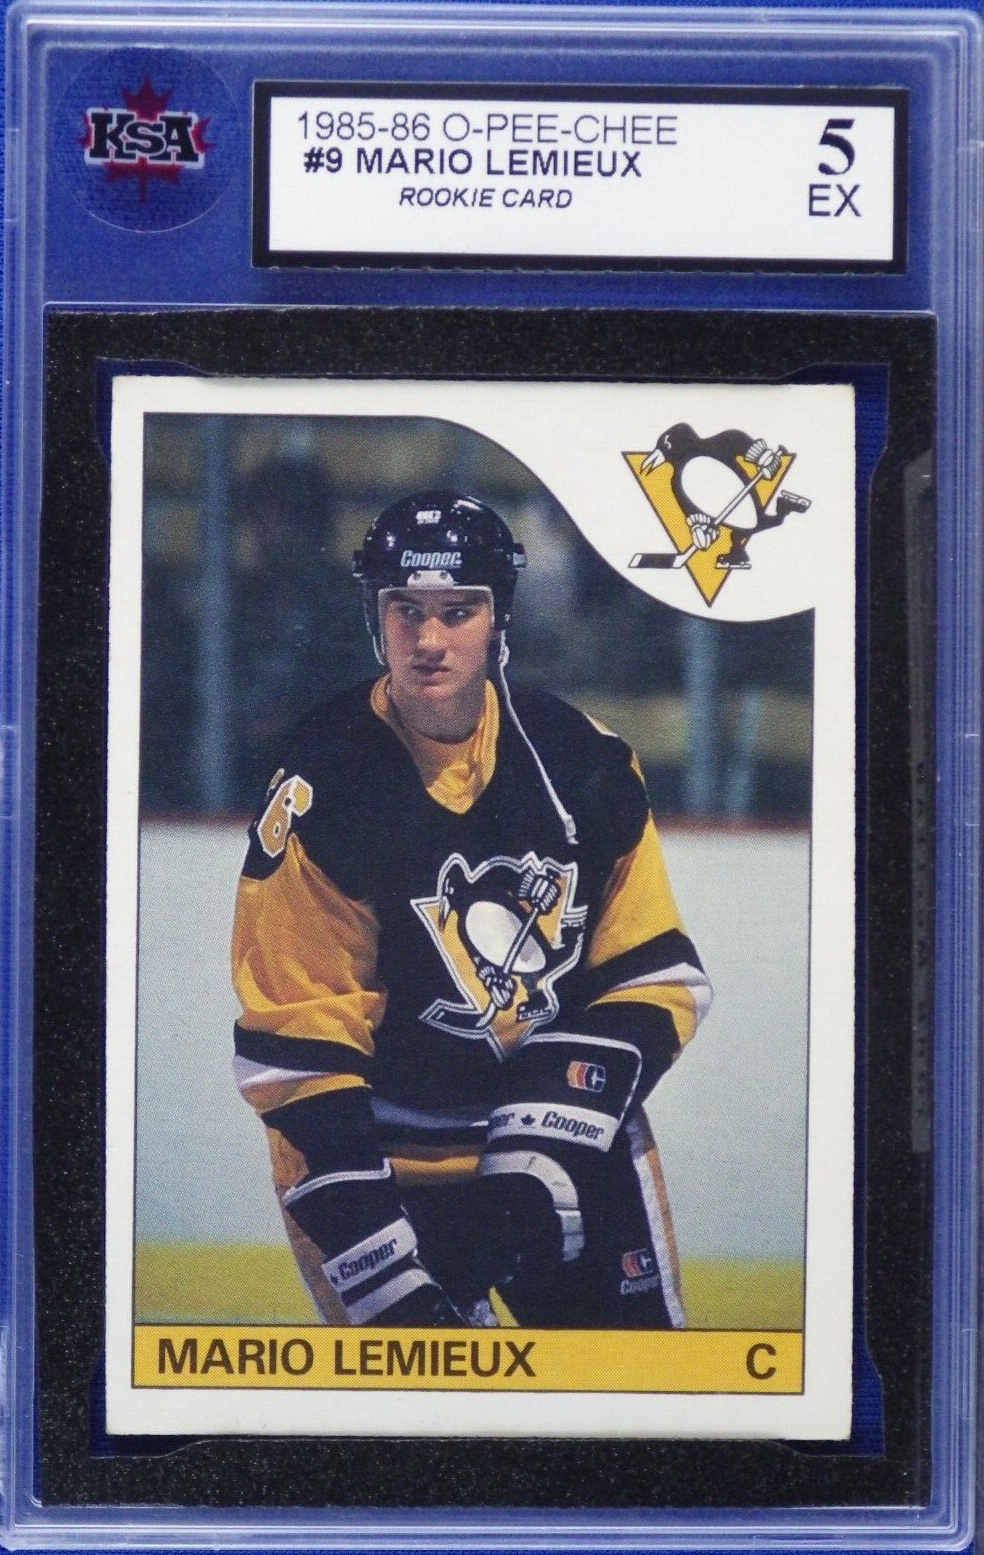 1985-86 O-Pee-Chee OPC #9 Mario Lemieux RC Rookie Card. Graded KSA 5 - EX. rookie card picture